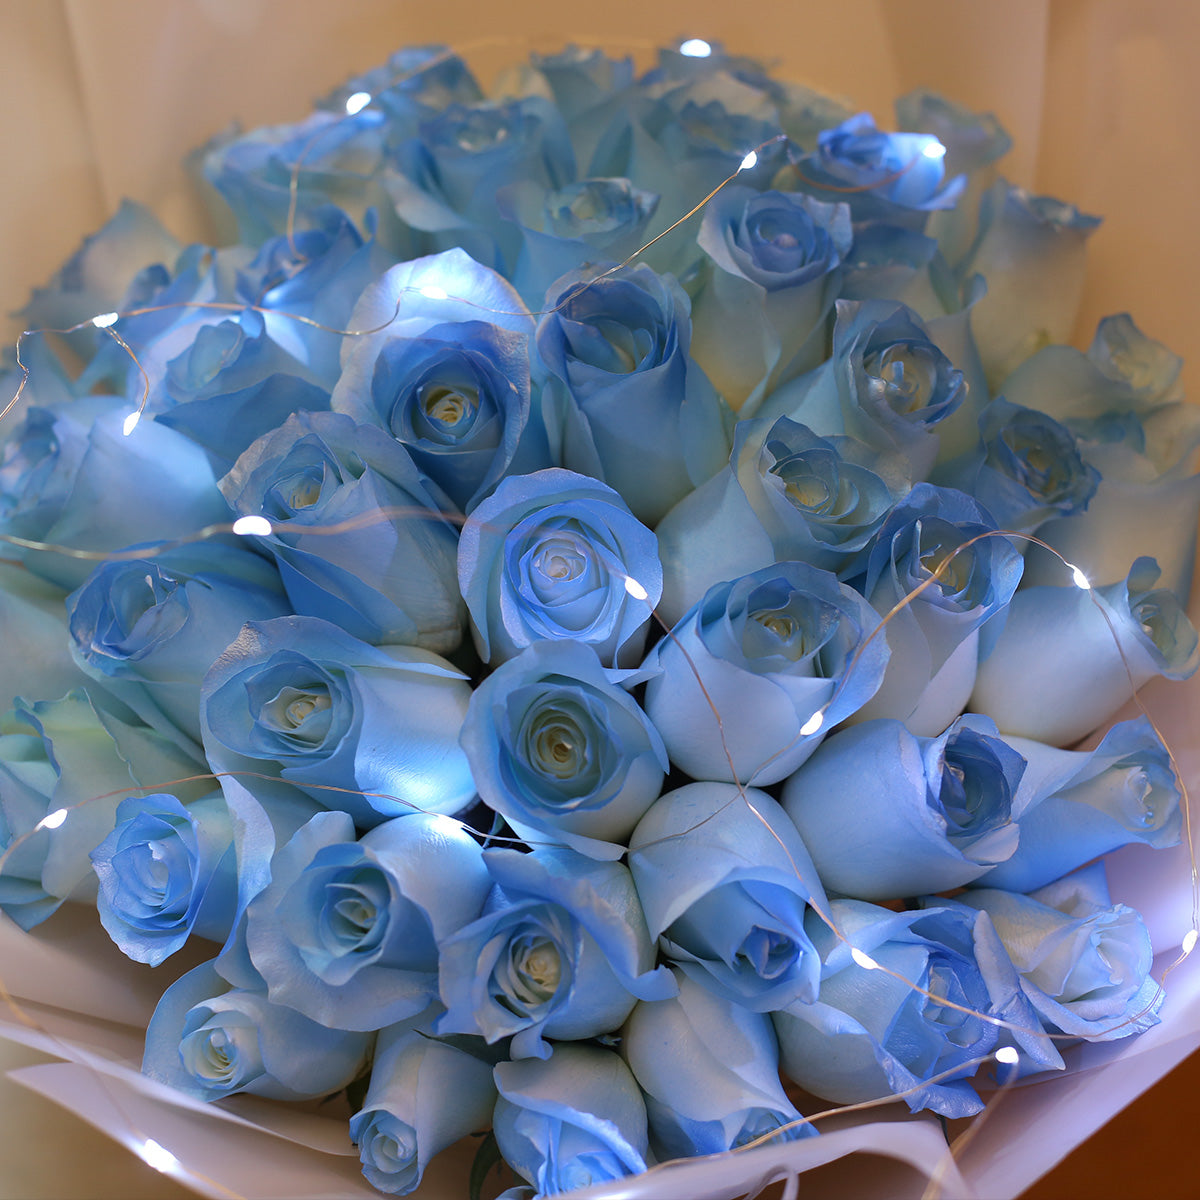 52 Ice Blue Dyeing Rose Bouquet 52 冰閃藍花束 Frozen